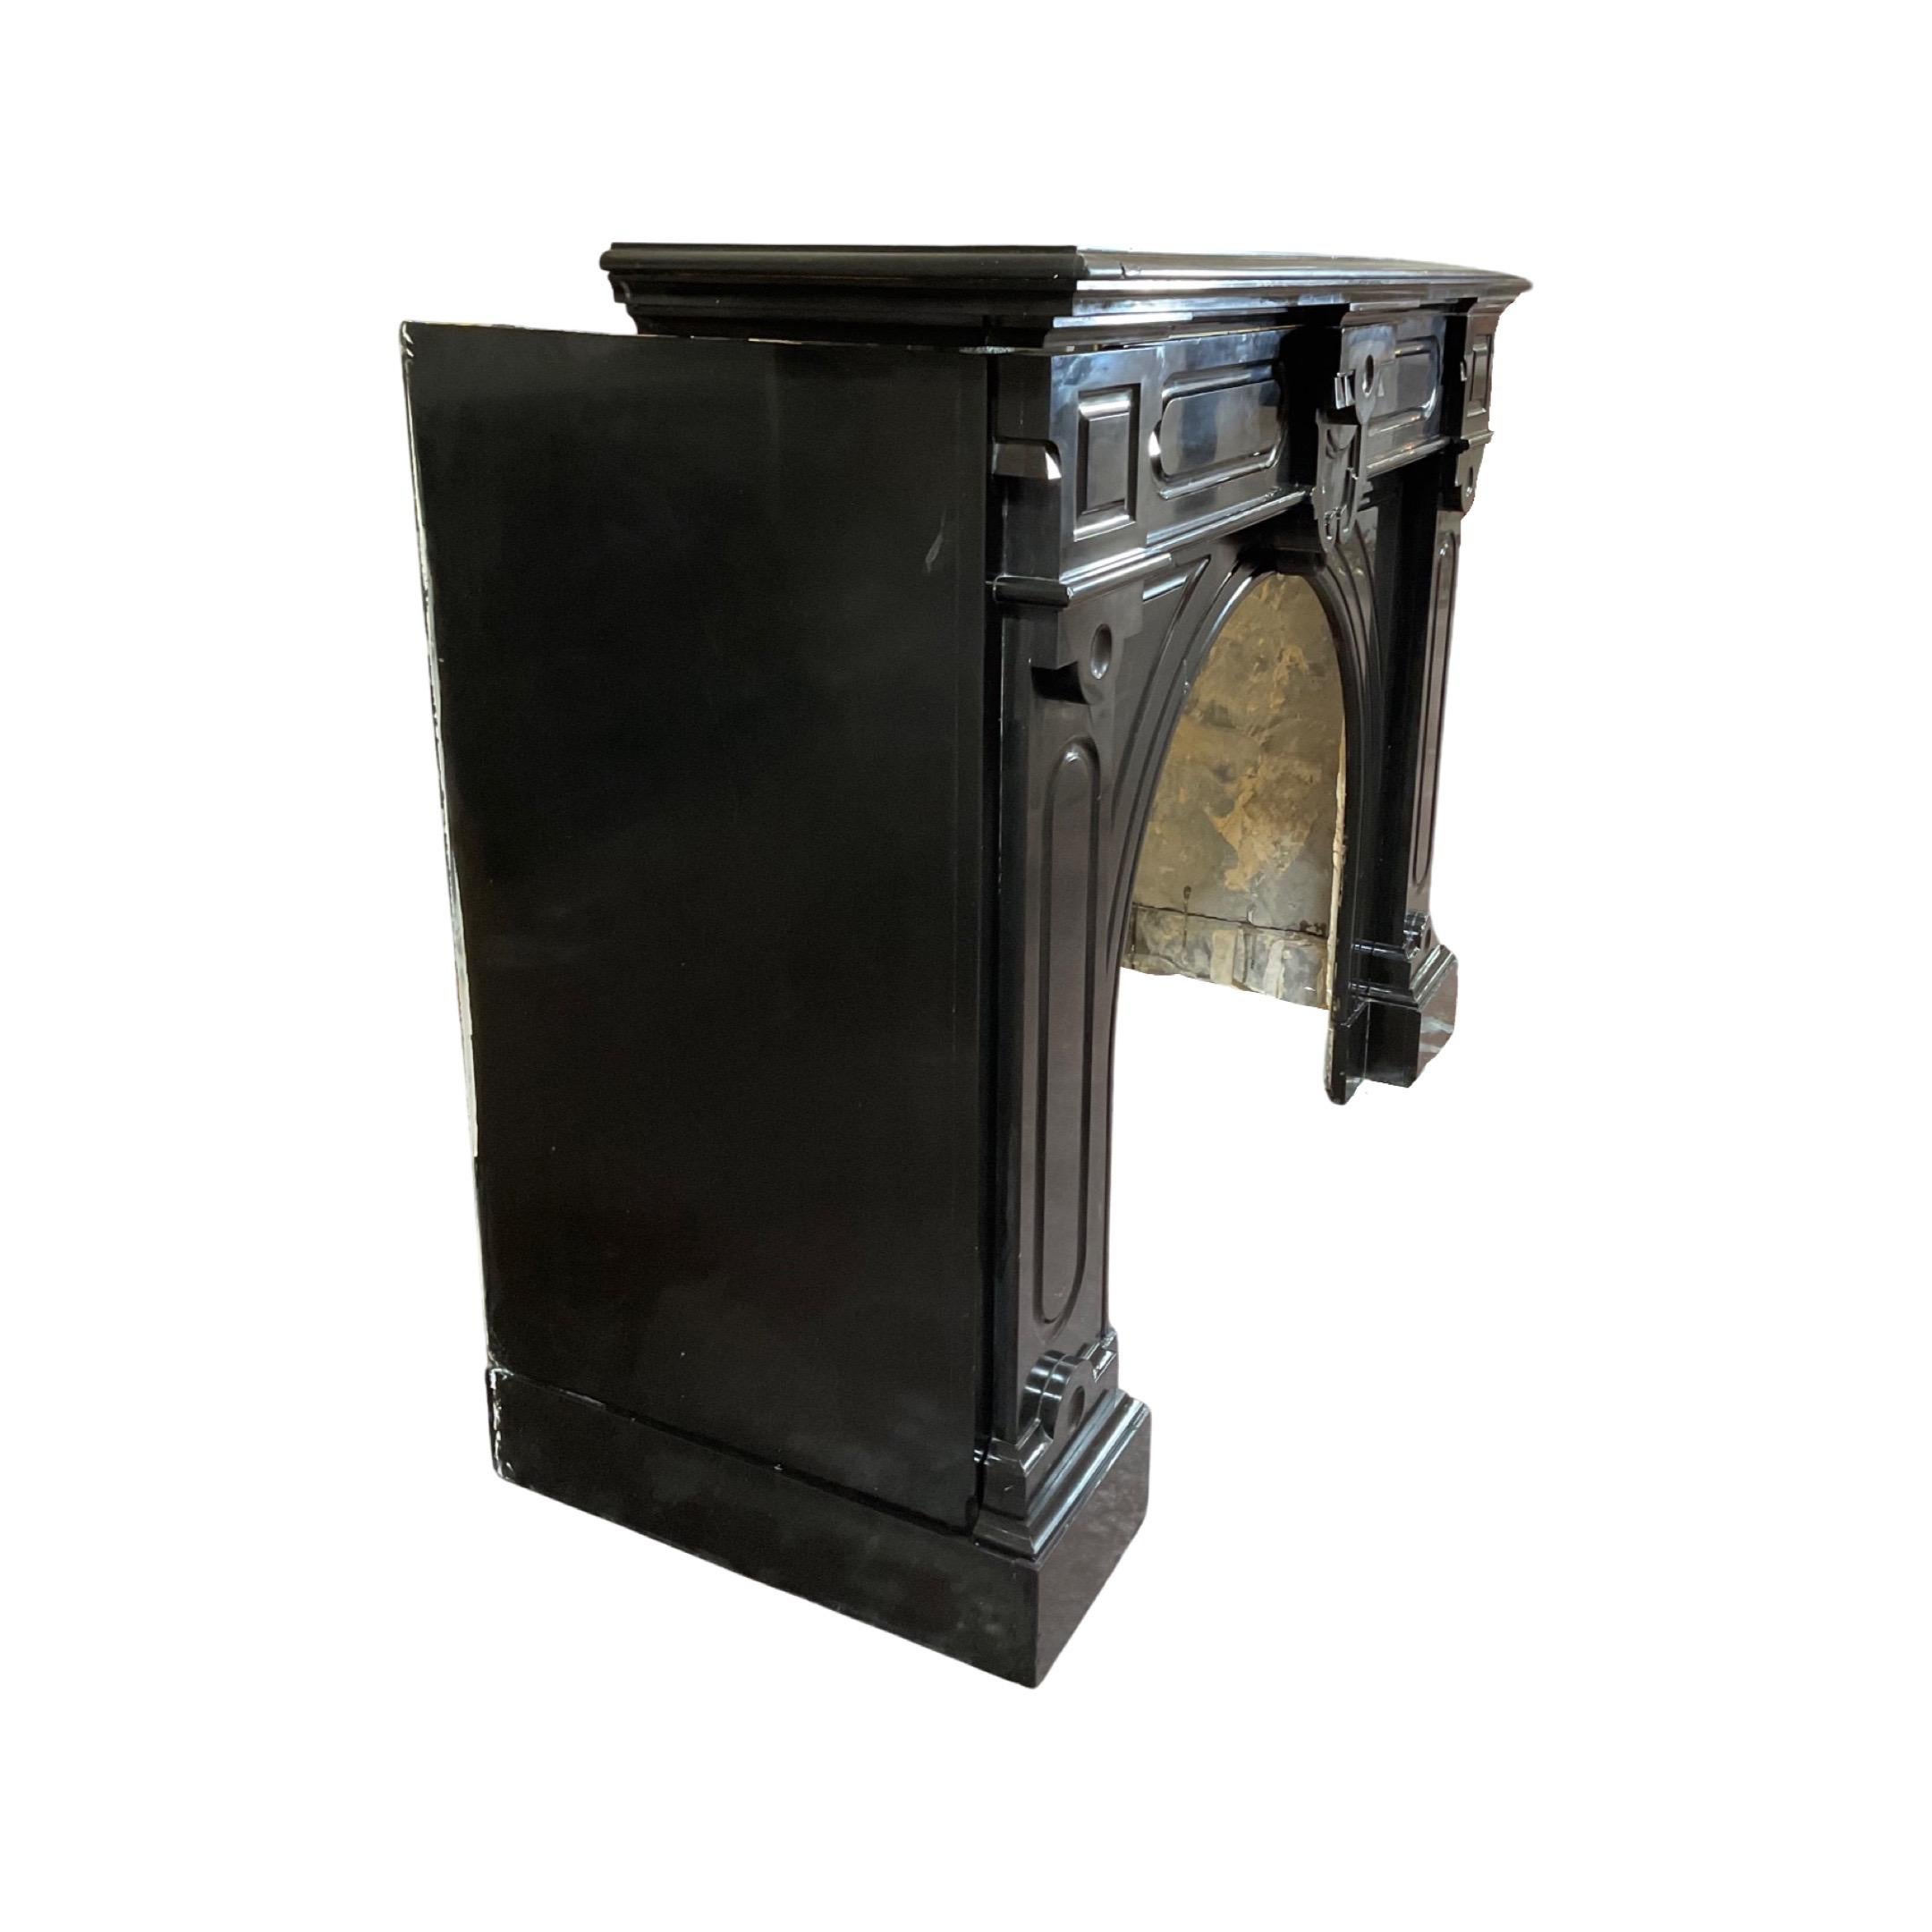 This unique piece of French craftsmanship is sure to make a statement in any home. The black marble mantel, inspired by the Louis XVI style of the 1880s, is a perfect addition for a fireplace. Its timeless design is sure to last many generations